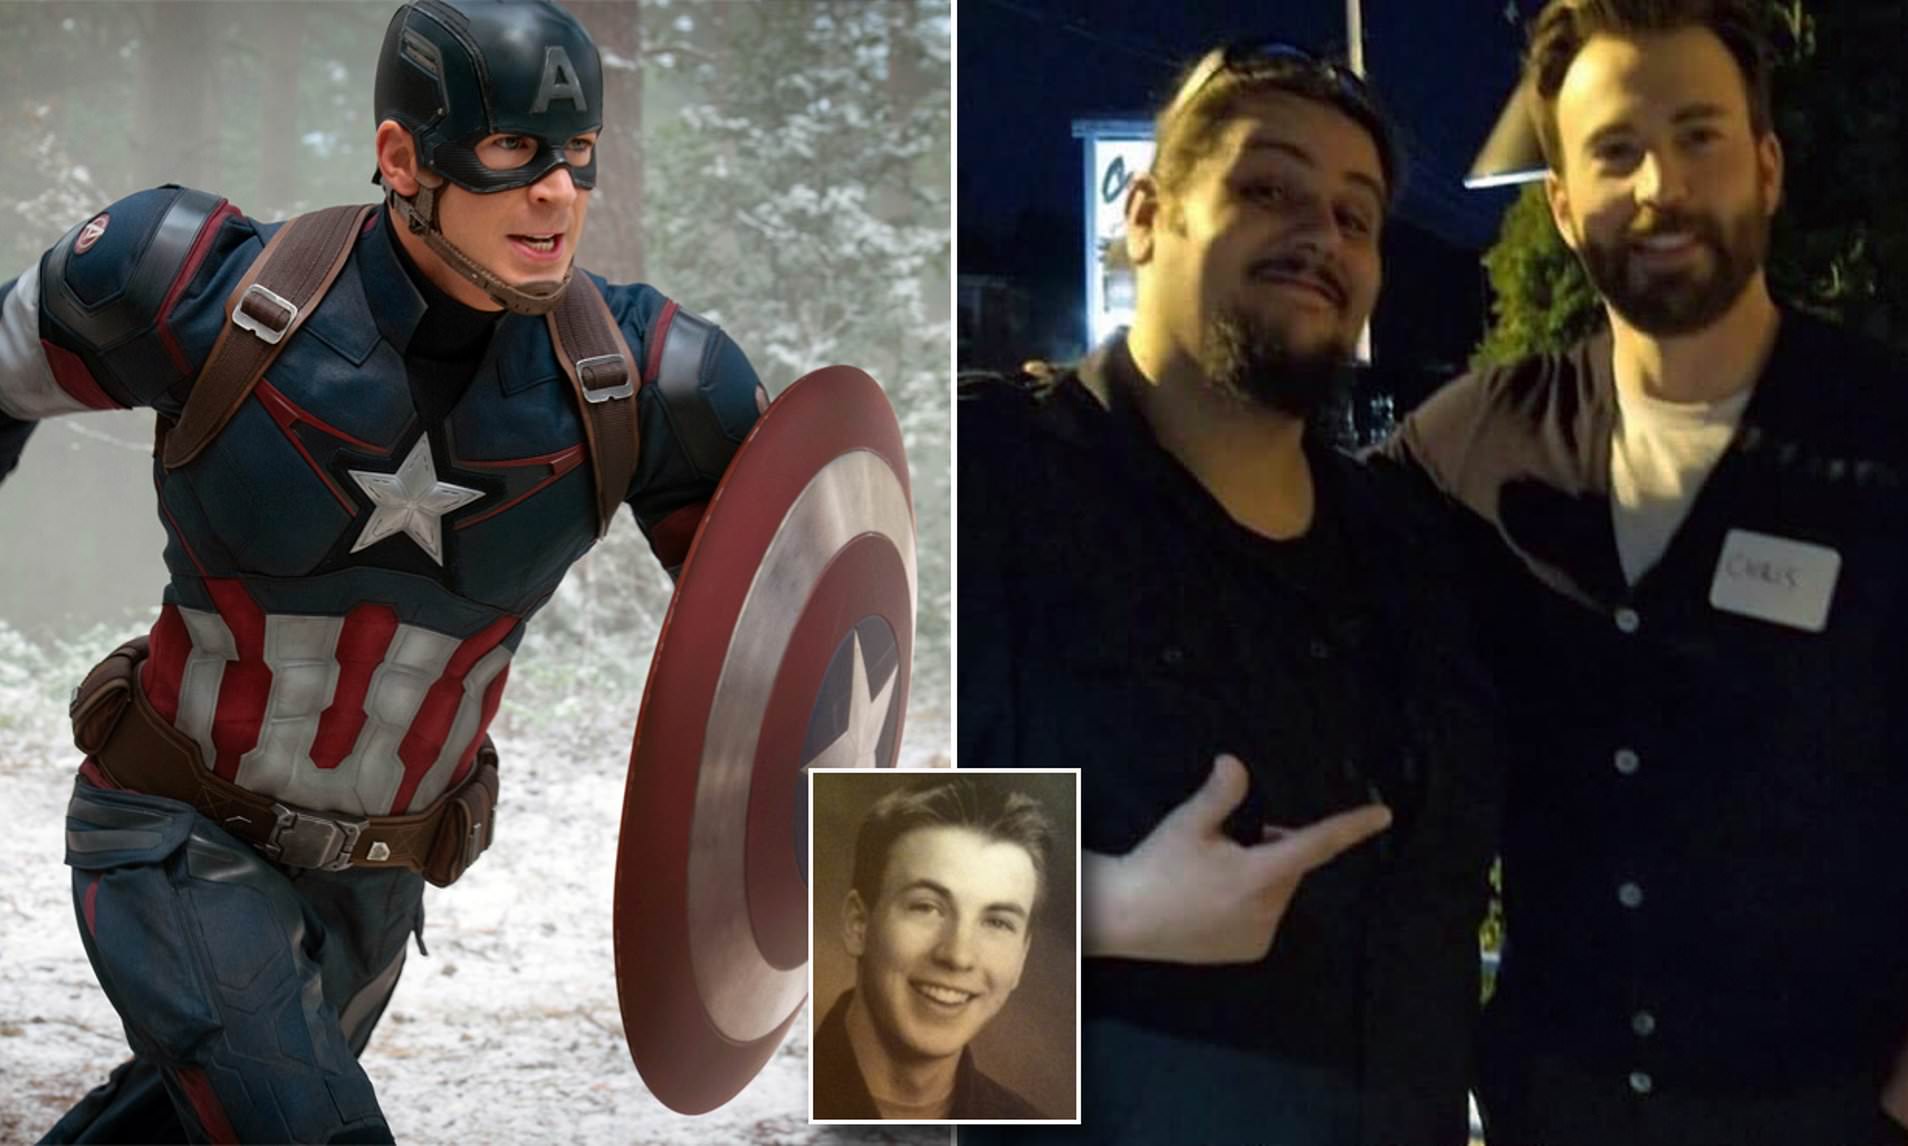 Chris ‘Captain America’ Evans rocked up to his high school reunion like a boss